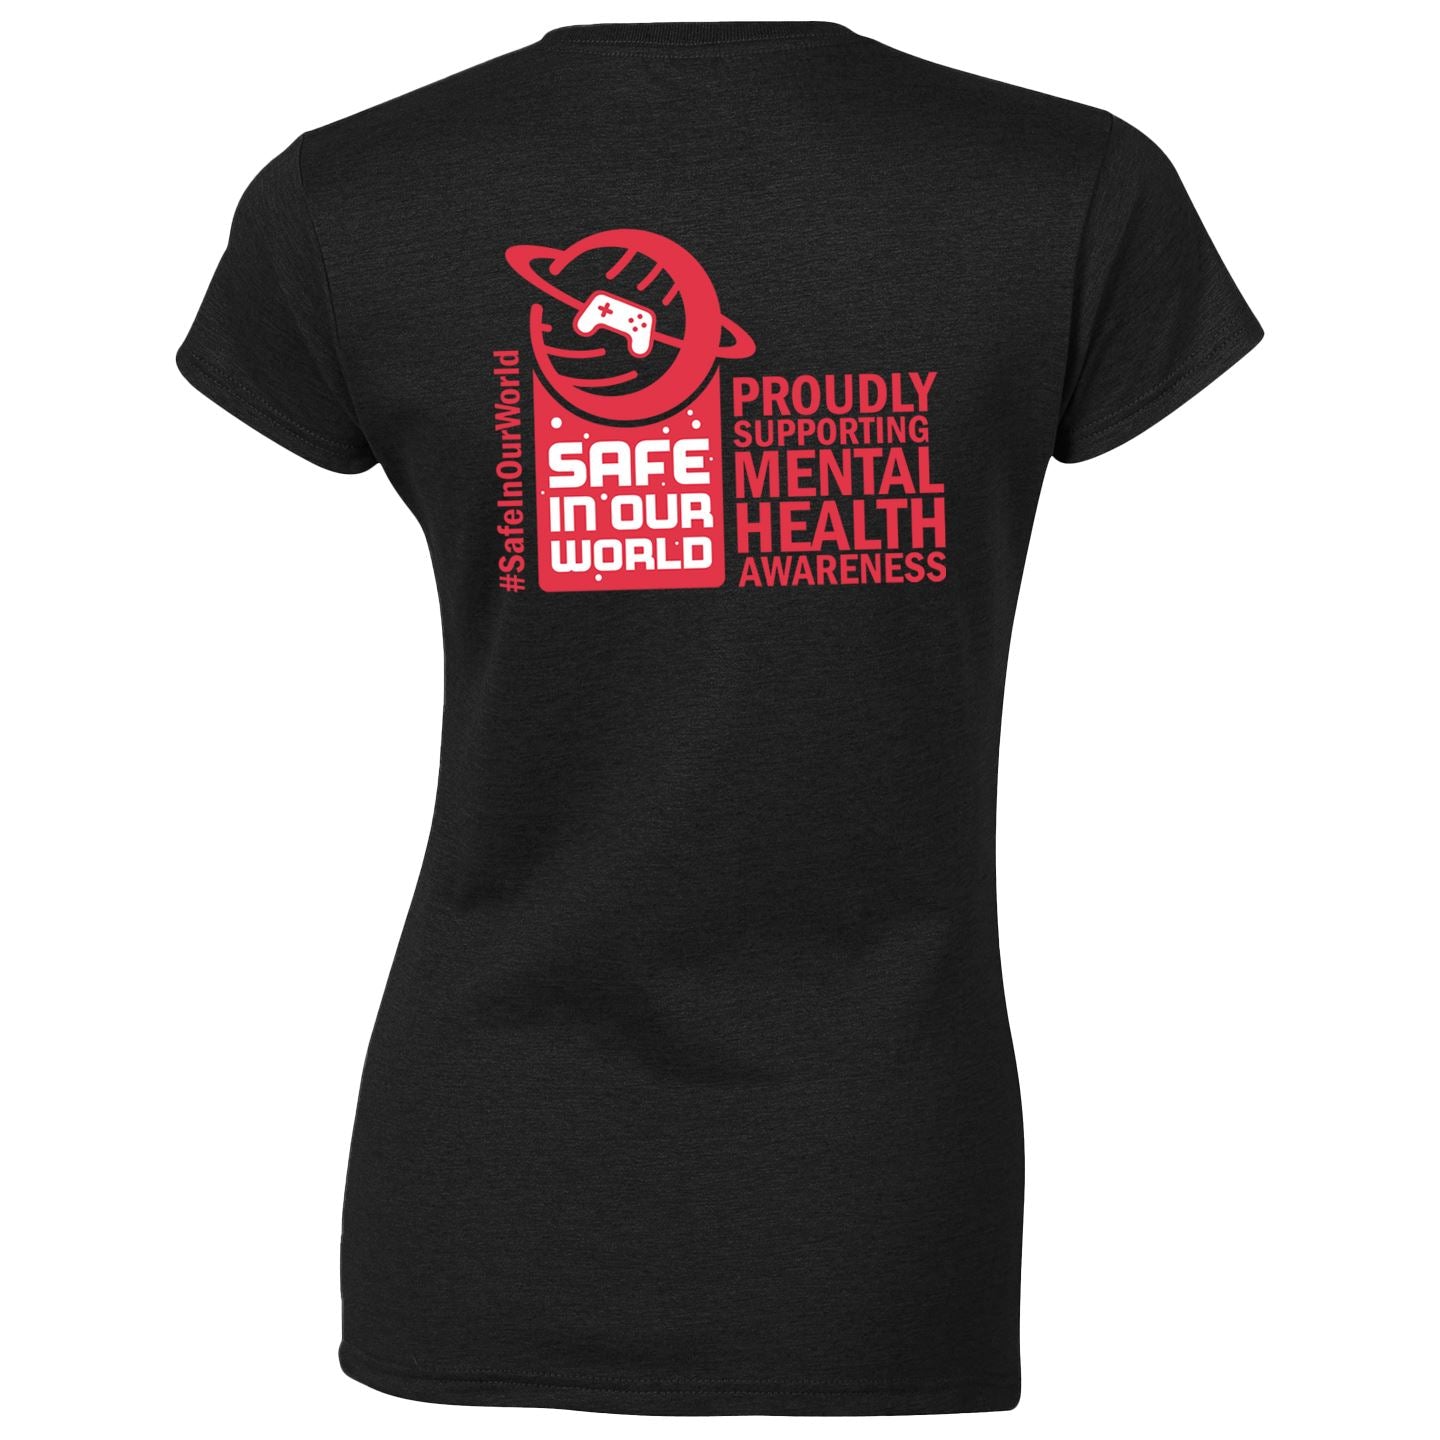 SIOW Official Charity T-Shirt BLACK/RED Ladies Cut T-Shirt Seven Squared 